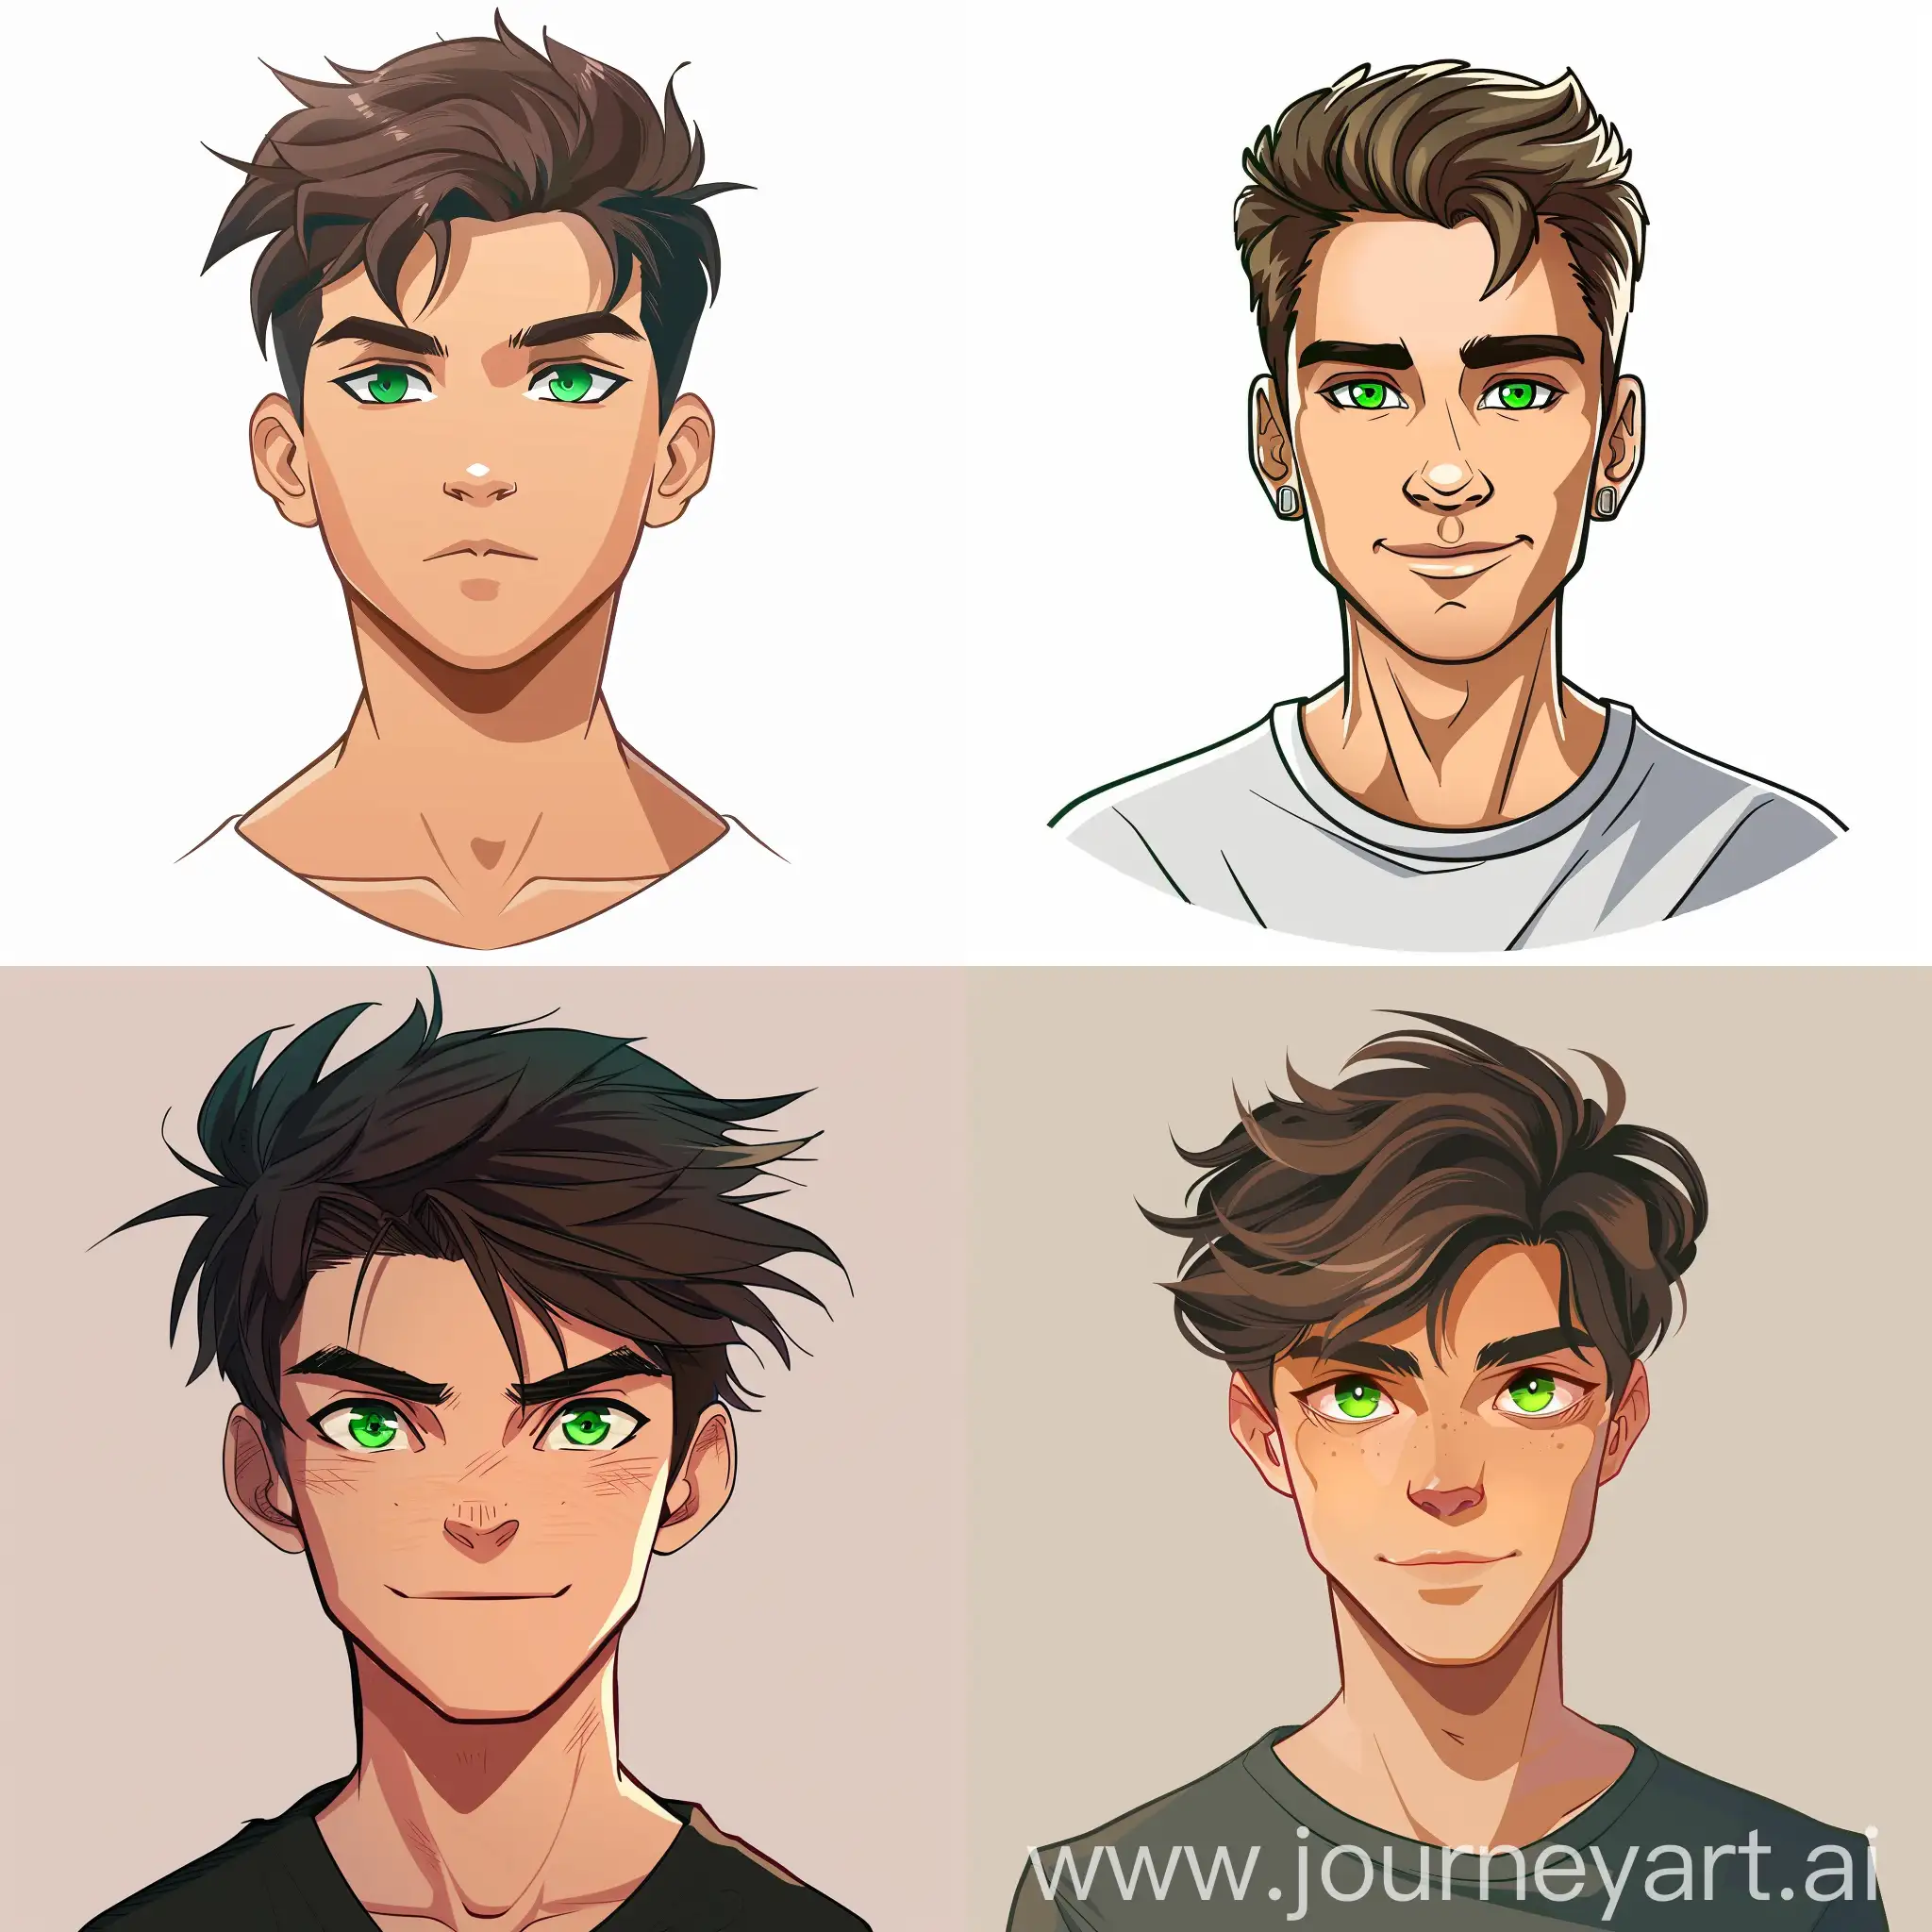 a 25-year-old guy with green eyes cartoon